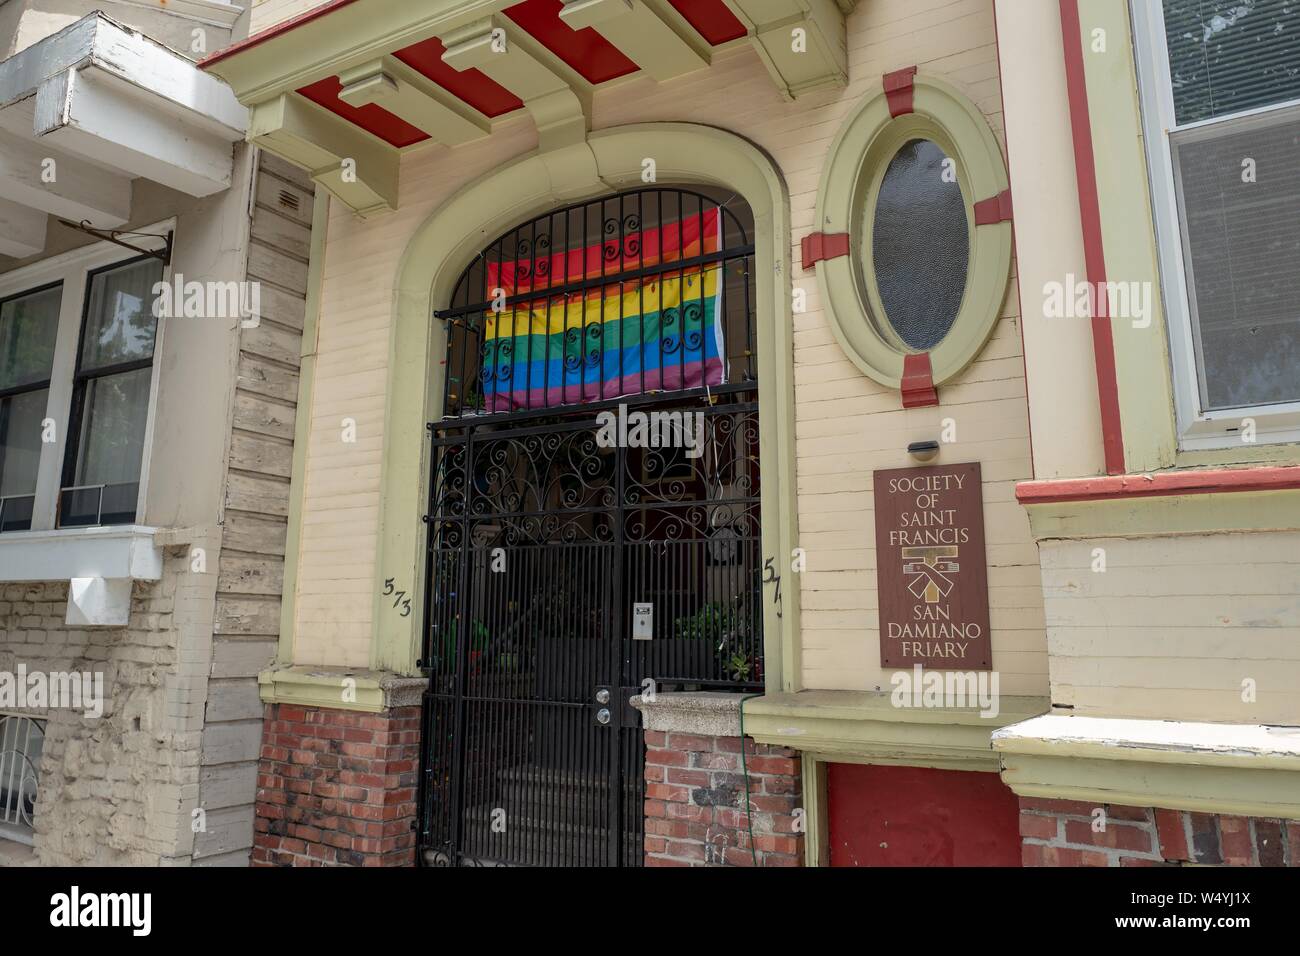 Facade with sign at monastery for Society of Saint Francis, an order of Franciscan monks in the Mission District neighborhood of San Francisco, California, with rainbow pride flag visible, July 18, 2019. () Stock Photo